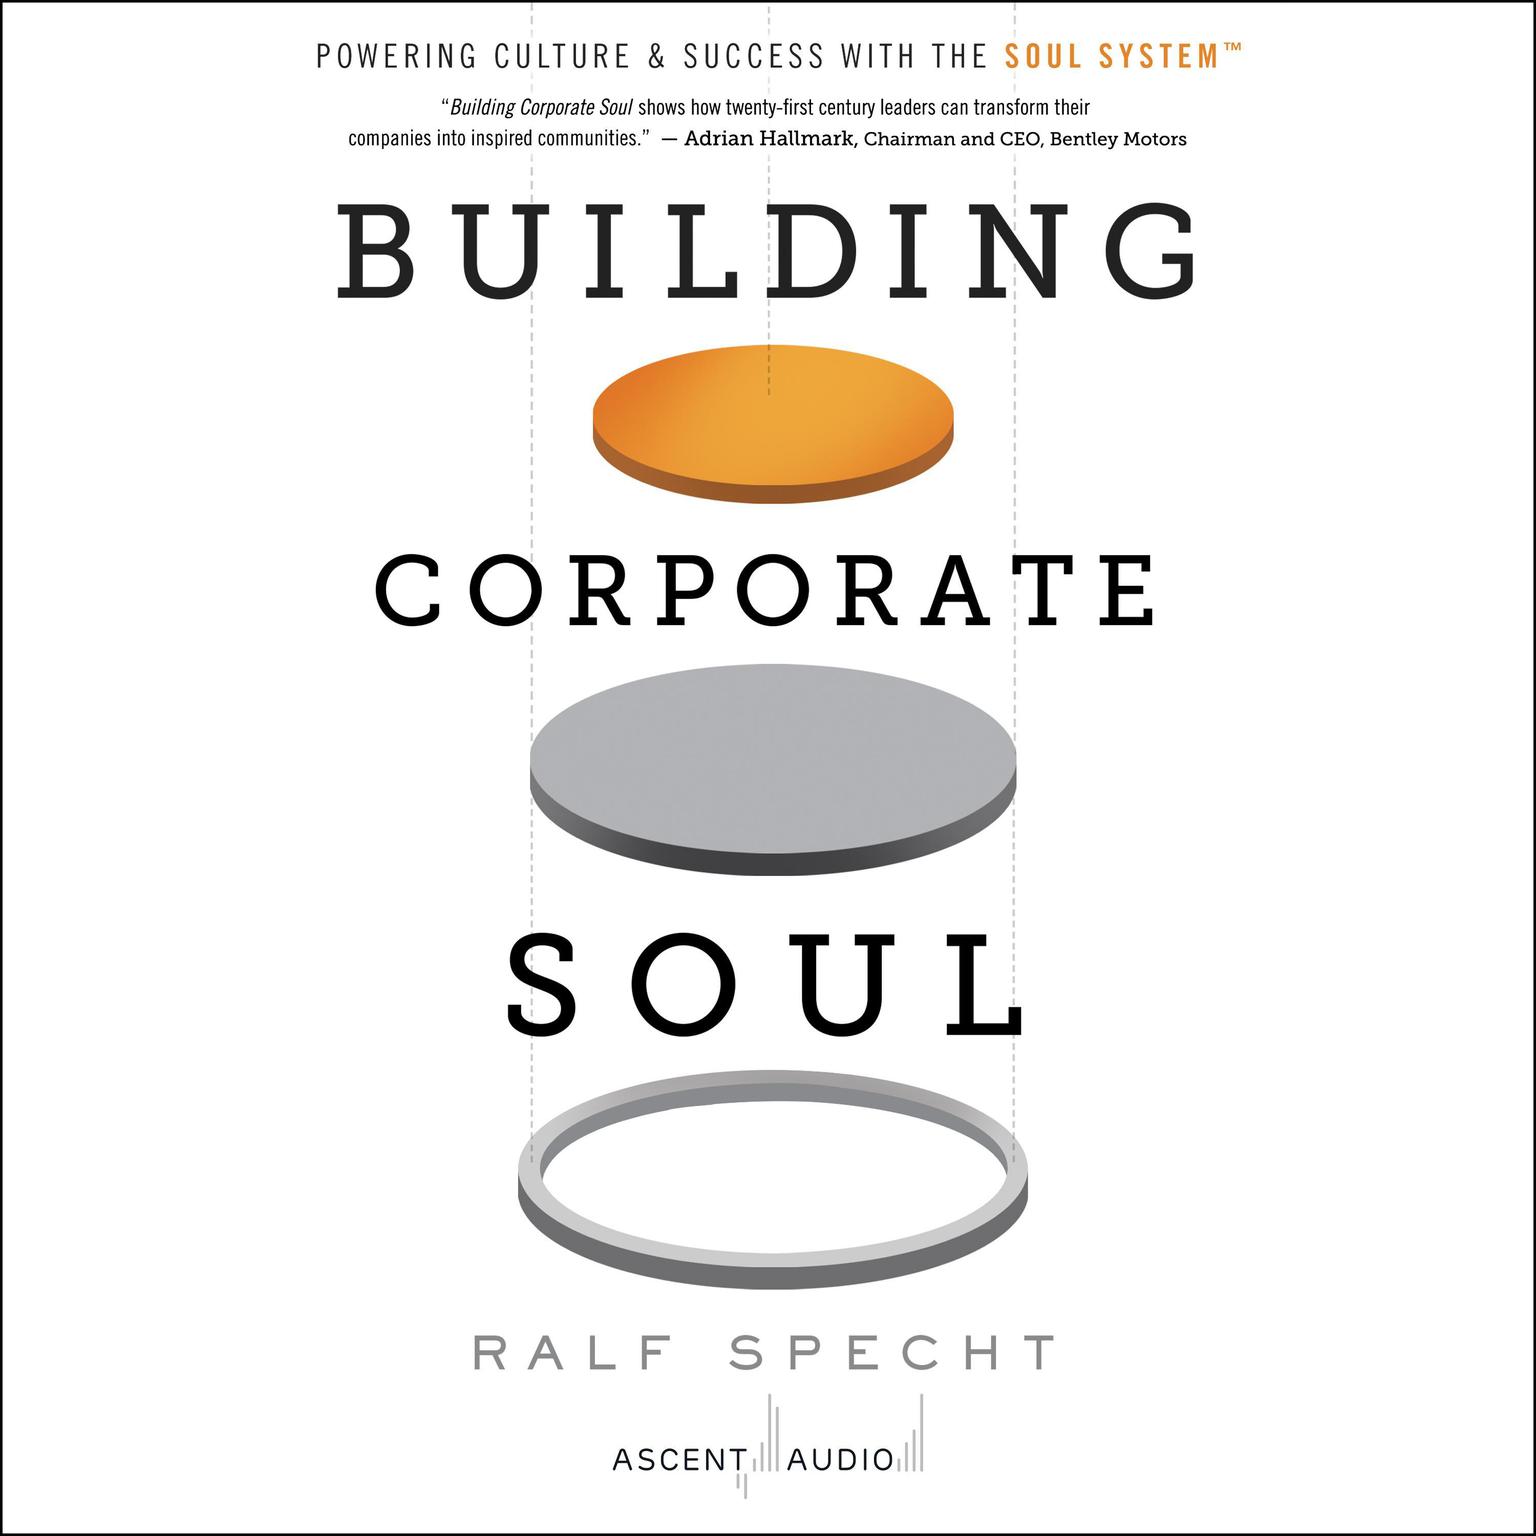 Building Corporate Soul: Powering Culture & Success with the Soul System Audiobook, by Ralf Specht